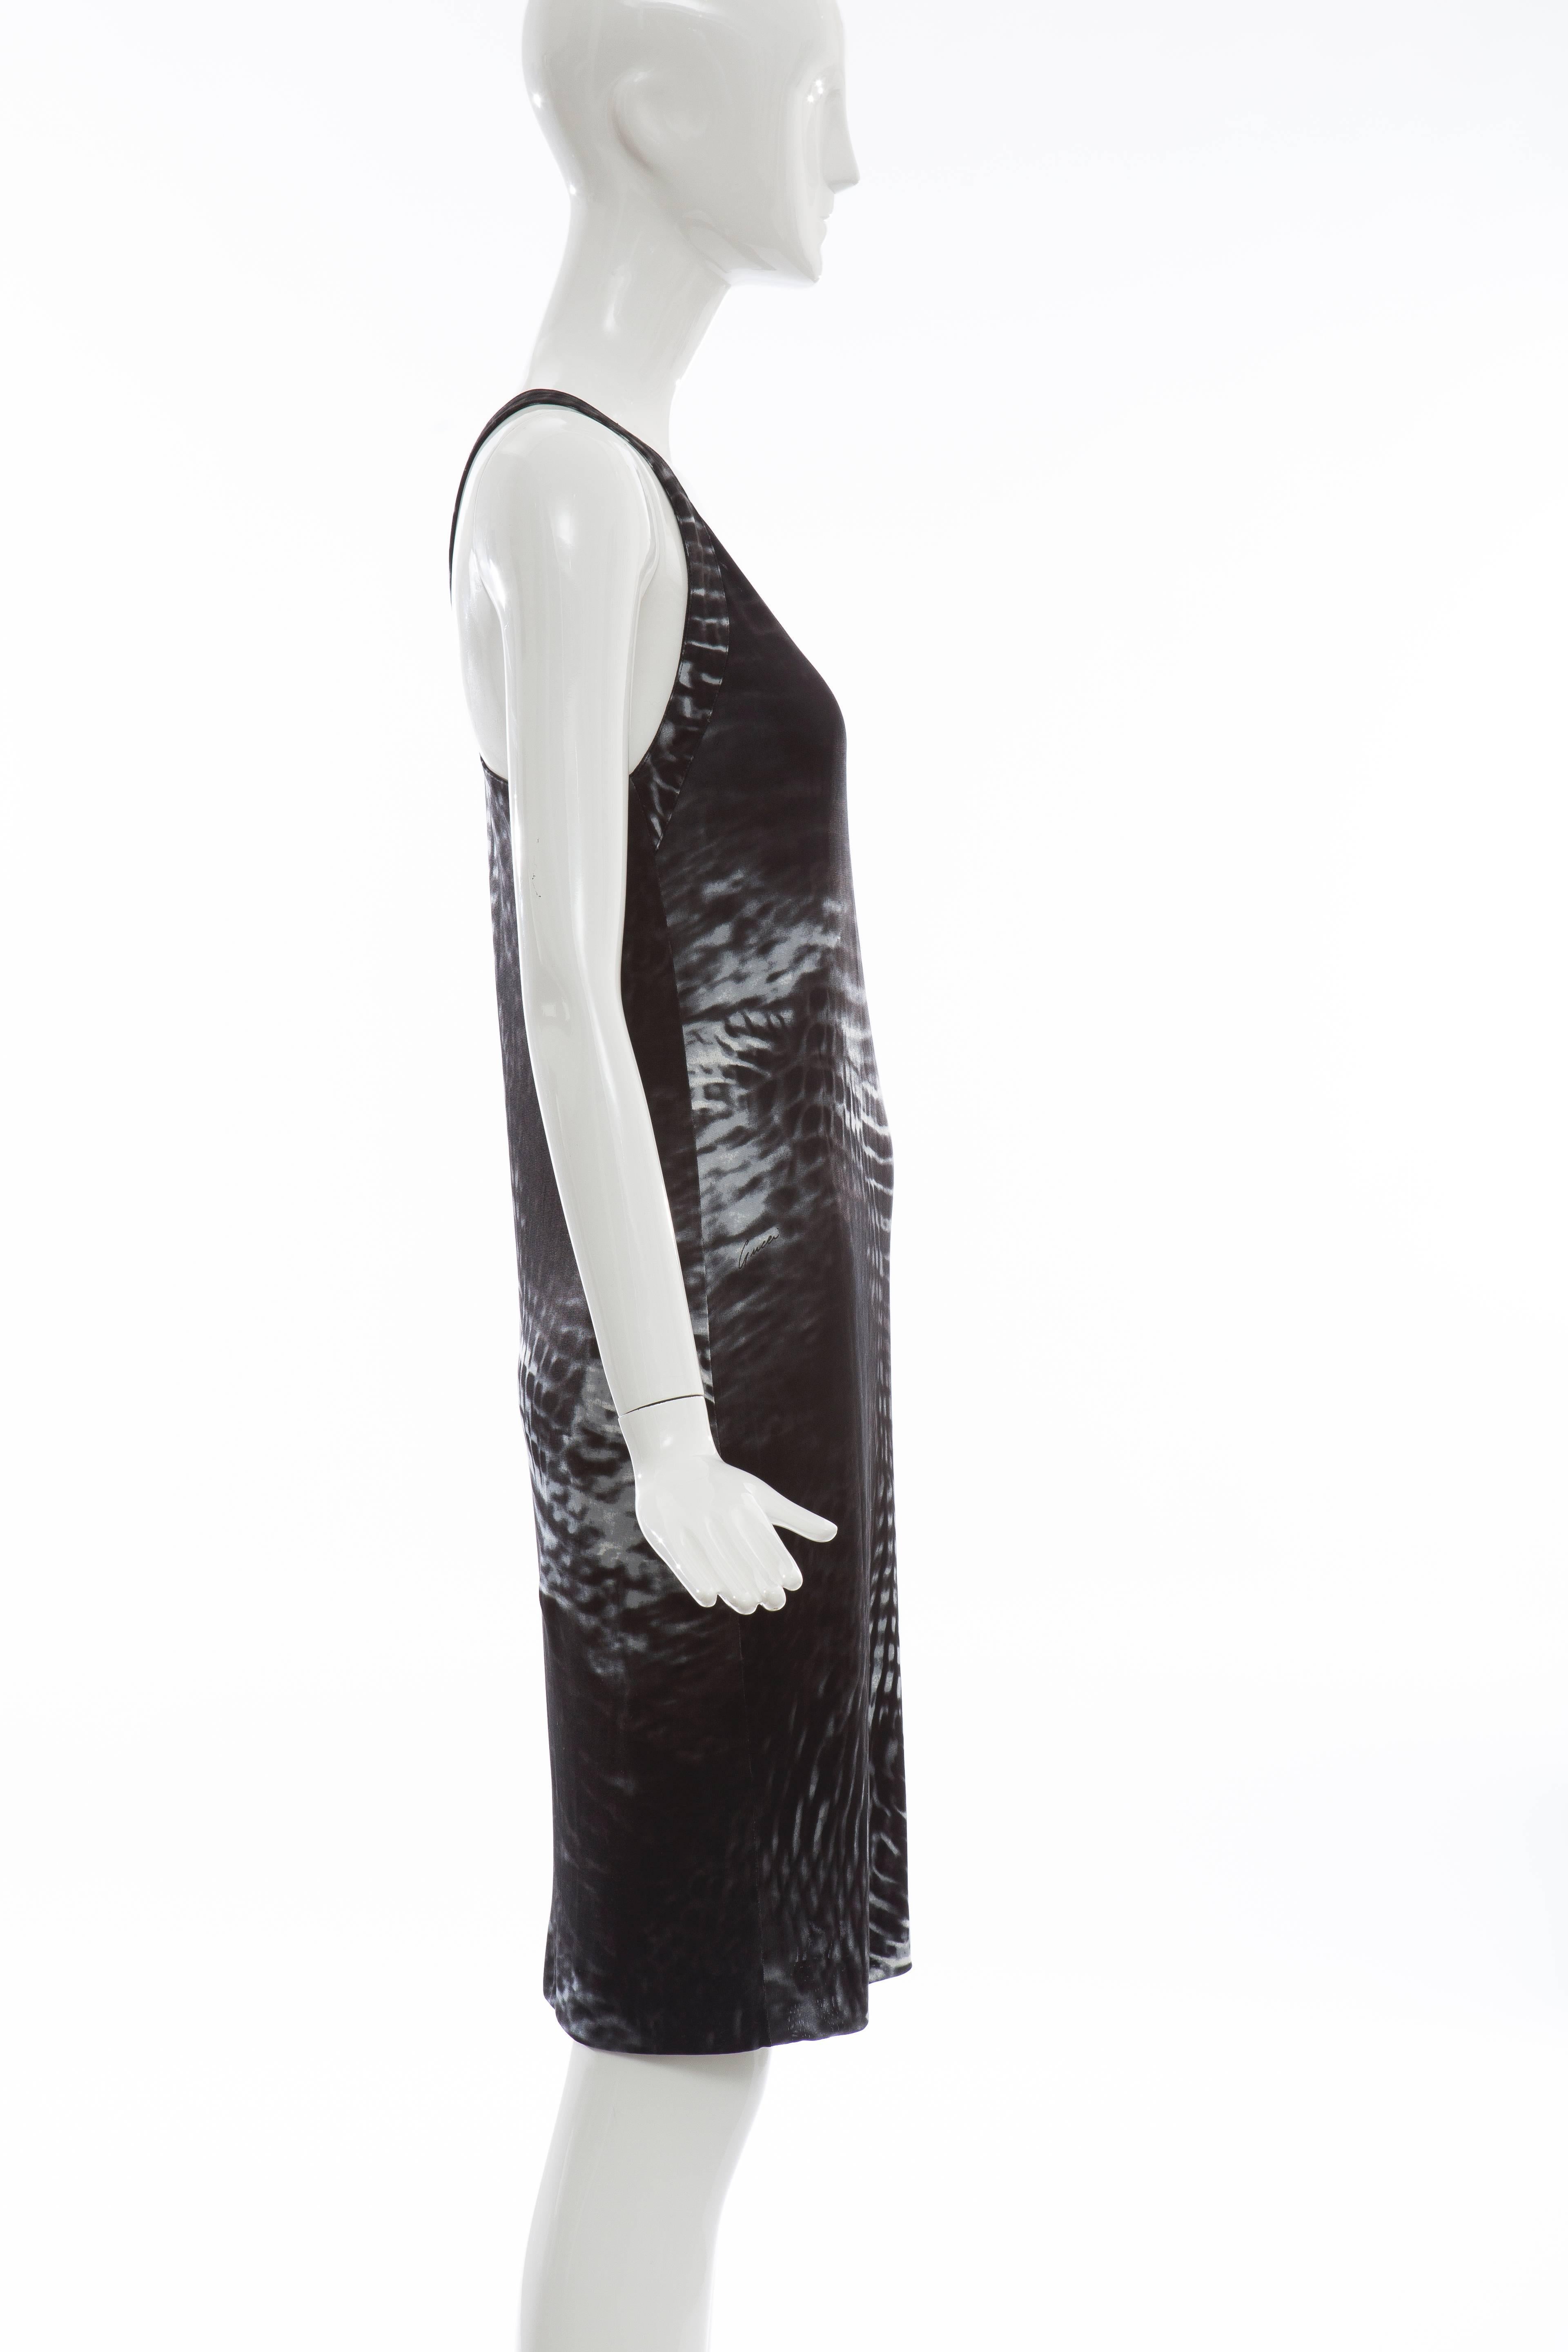 Tom Ford for Gucci Runway Black One-Shoulder Printed Dress , Spring 2000 In Excellent Condition For Sale In Cincinnati, OH